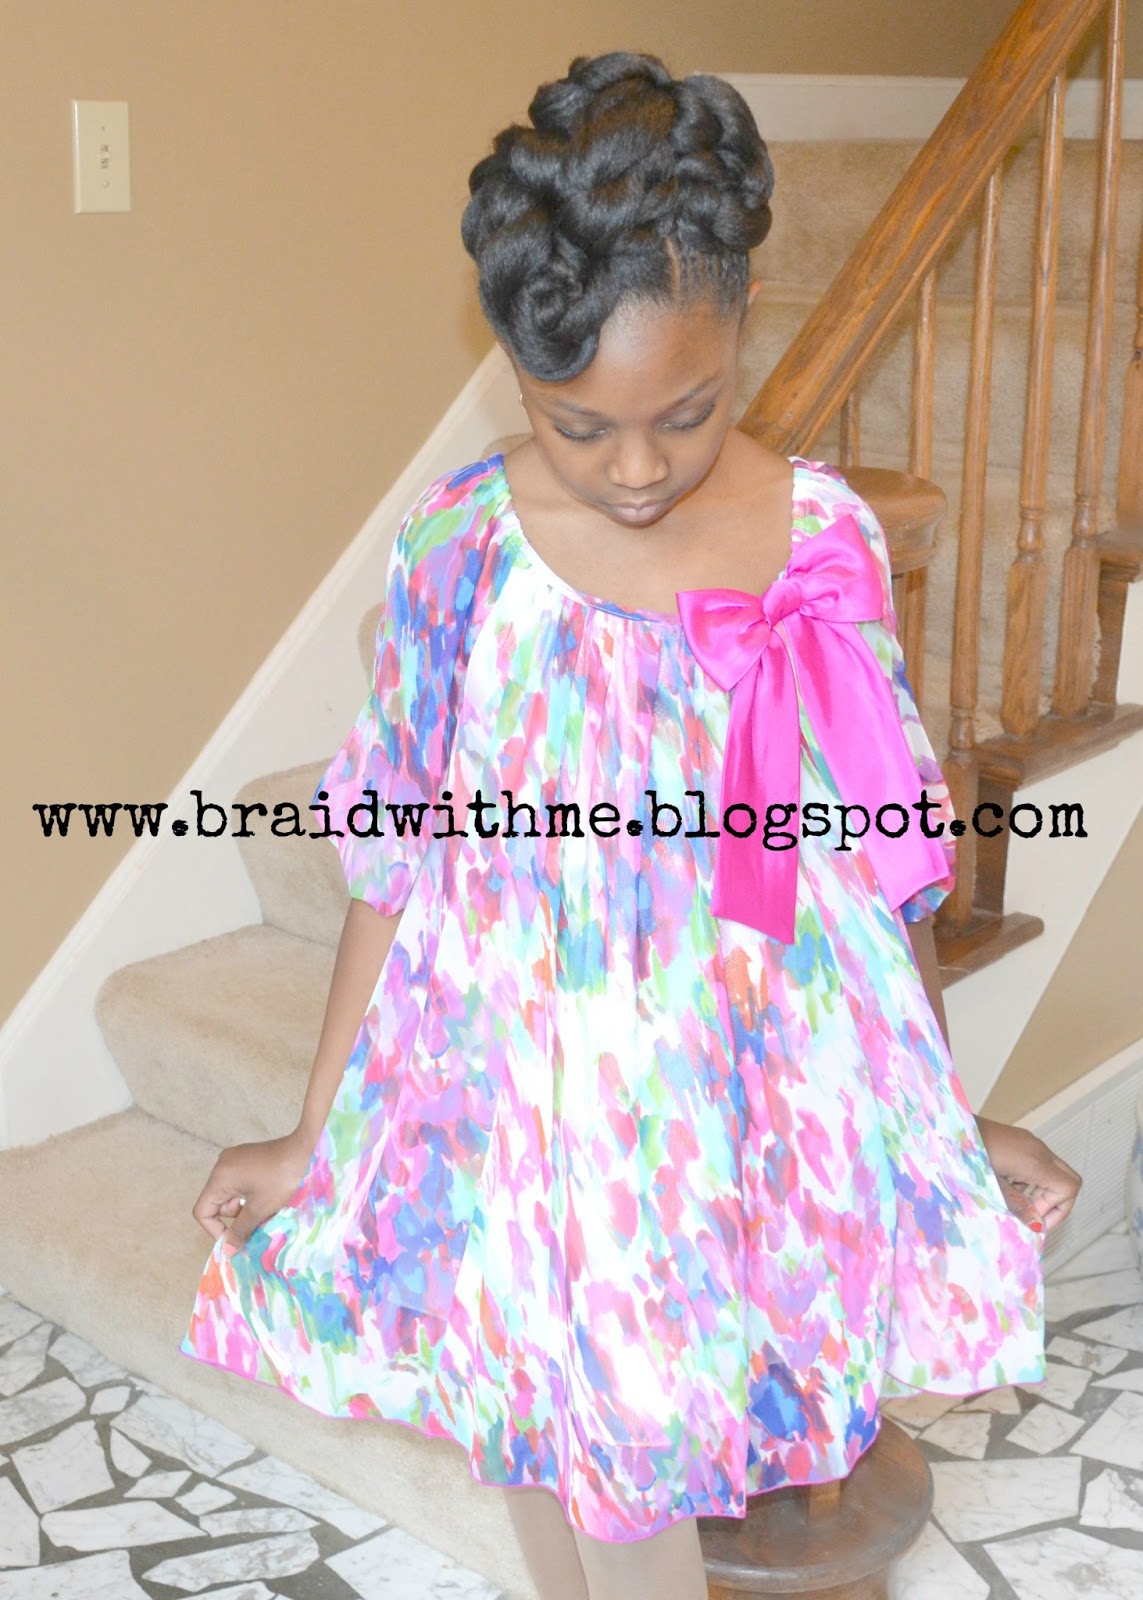 Braided Hairstyles For Black Girls With Beads Easter Updo for Little Girls with Natural Hair